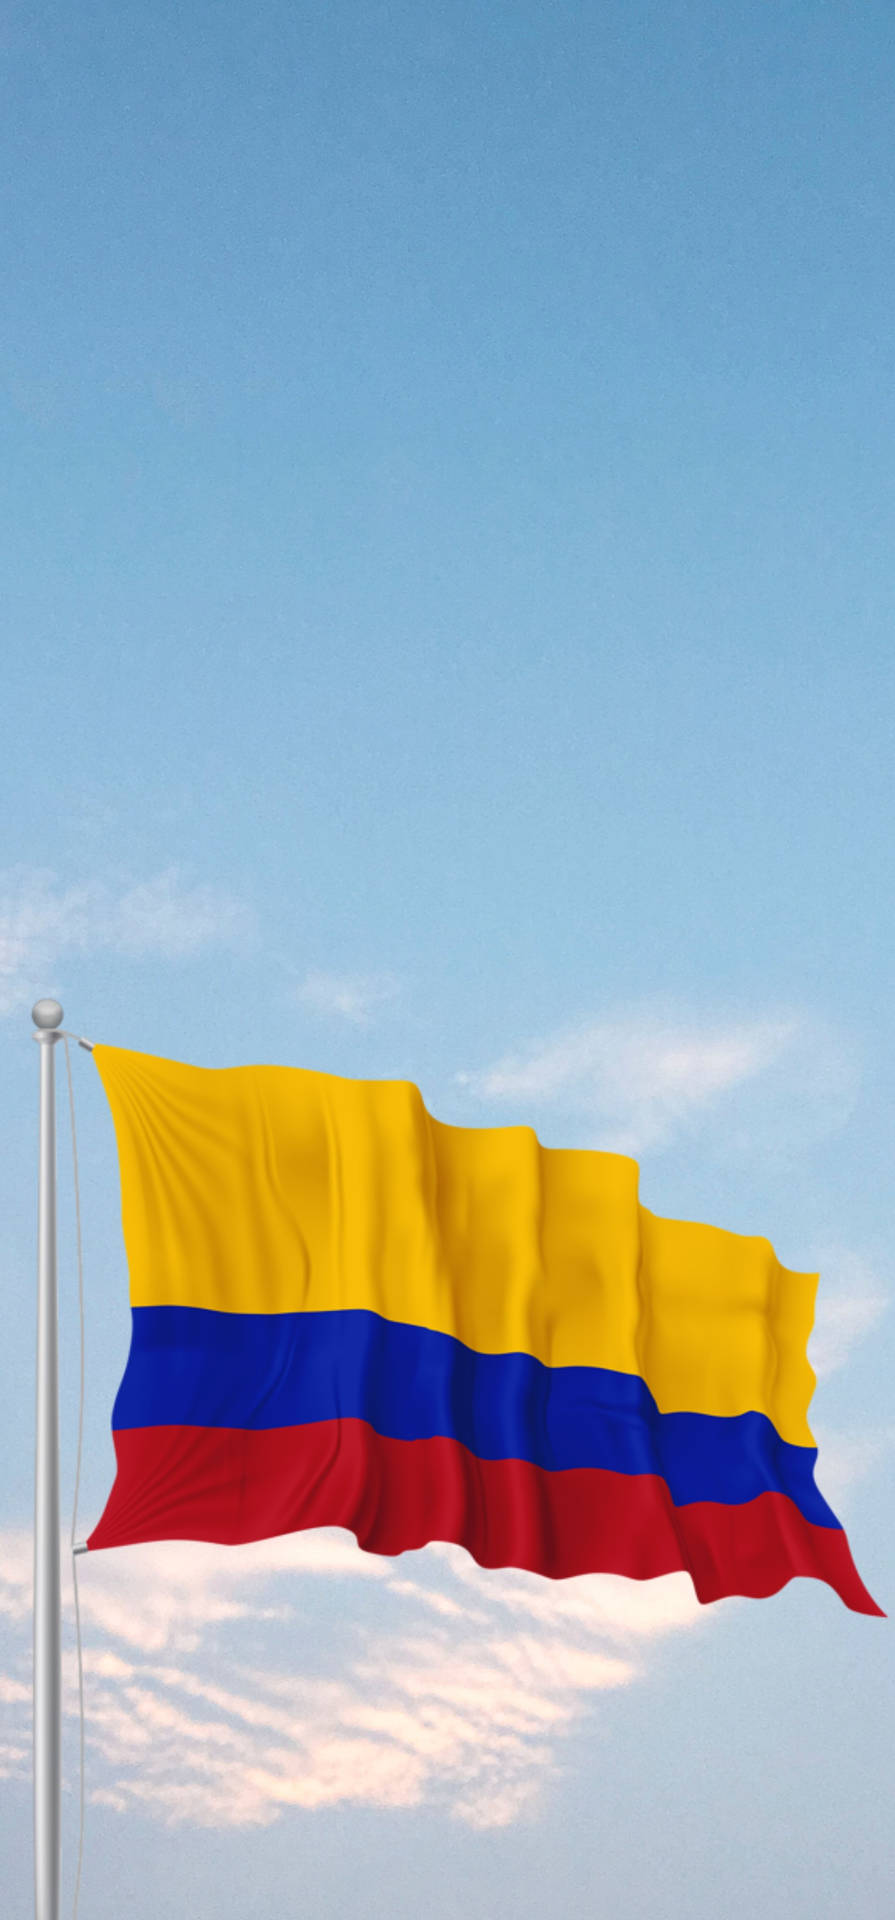 Colombia Flag In The Sky Background